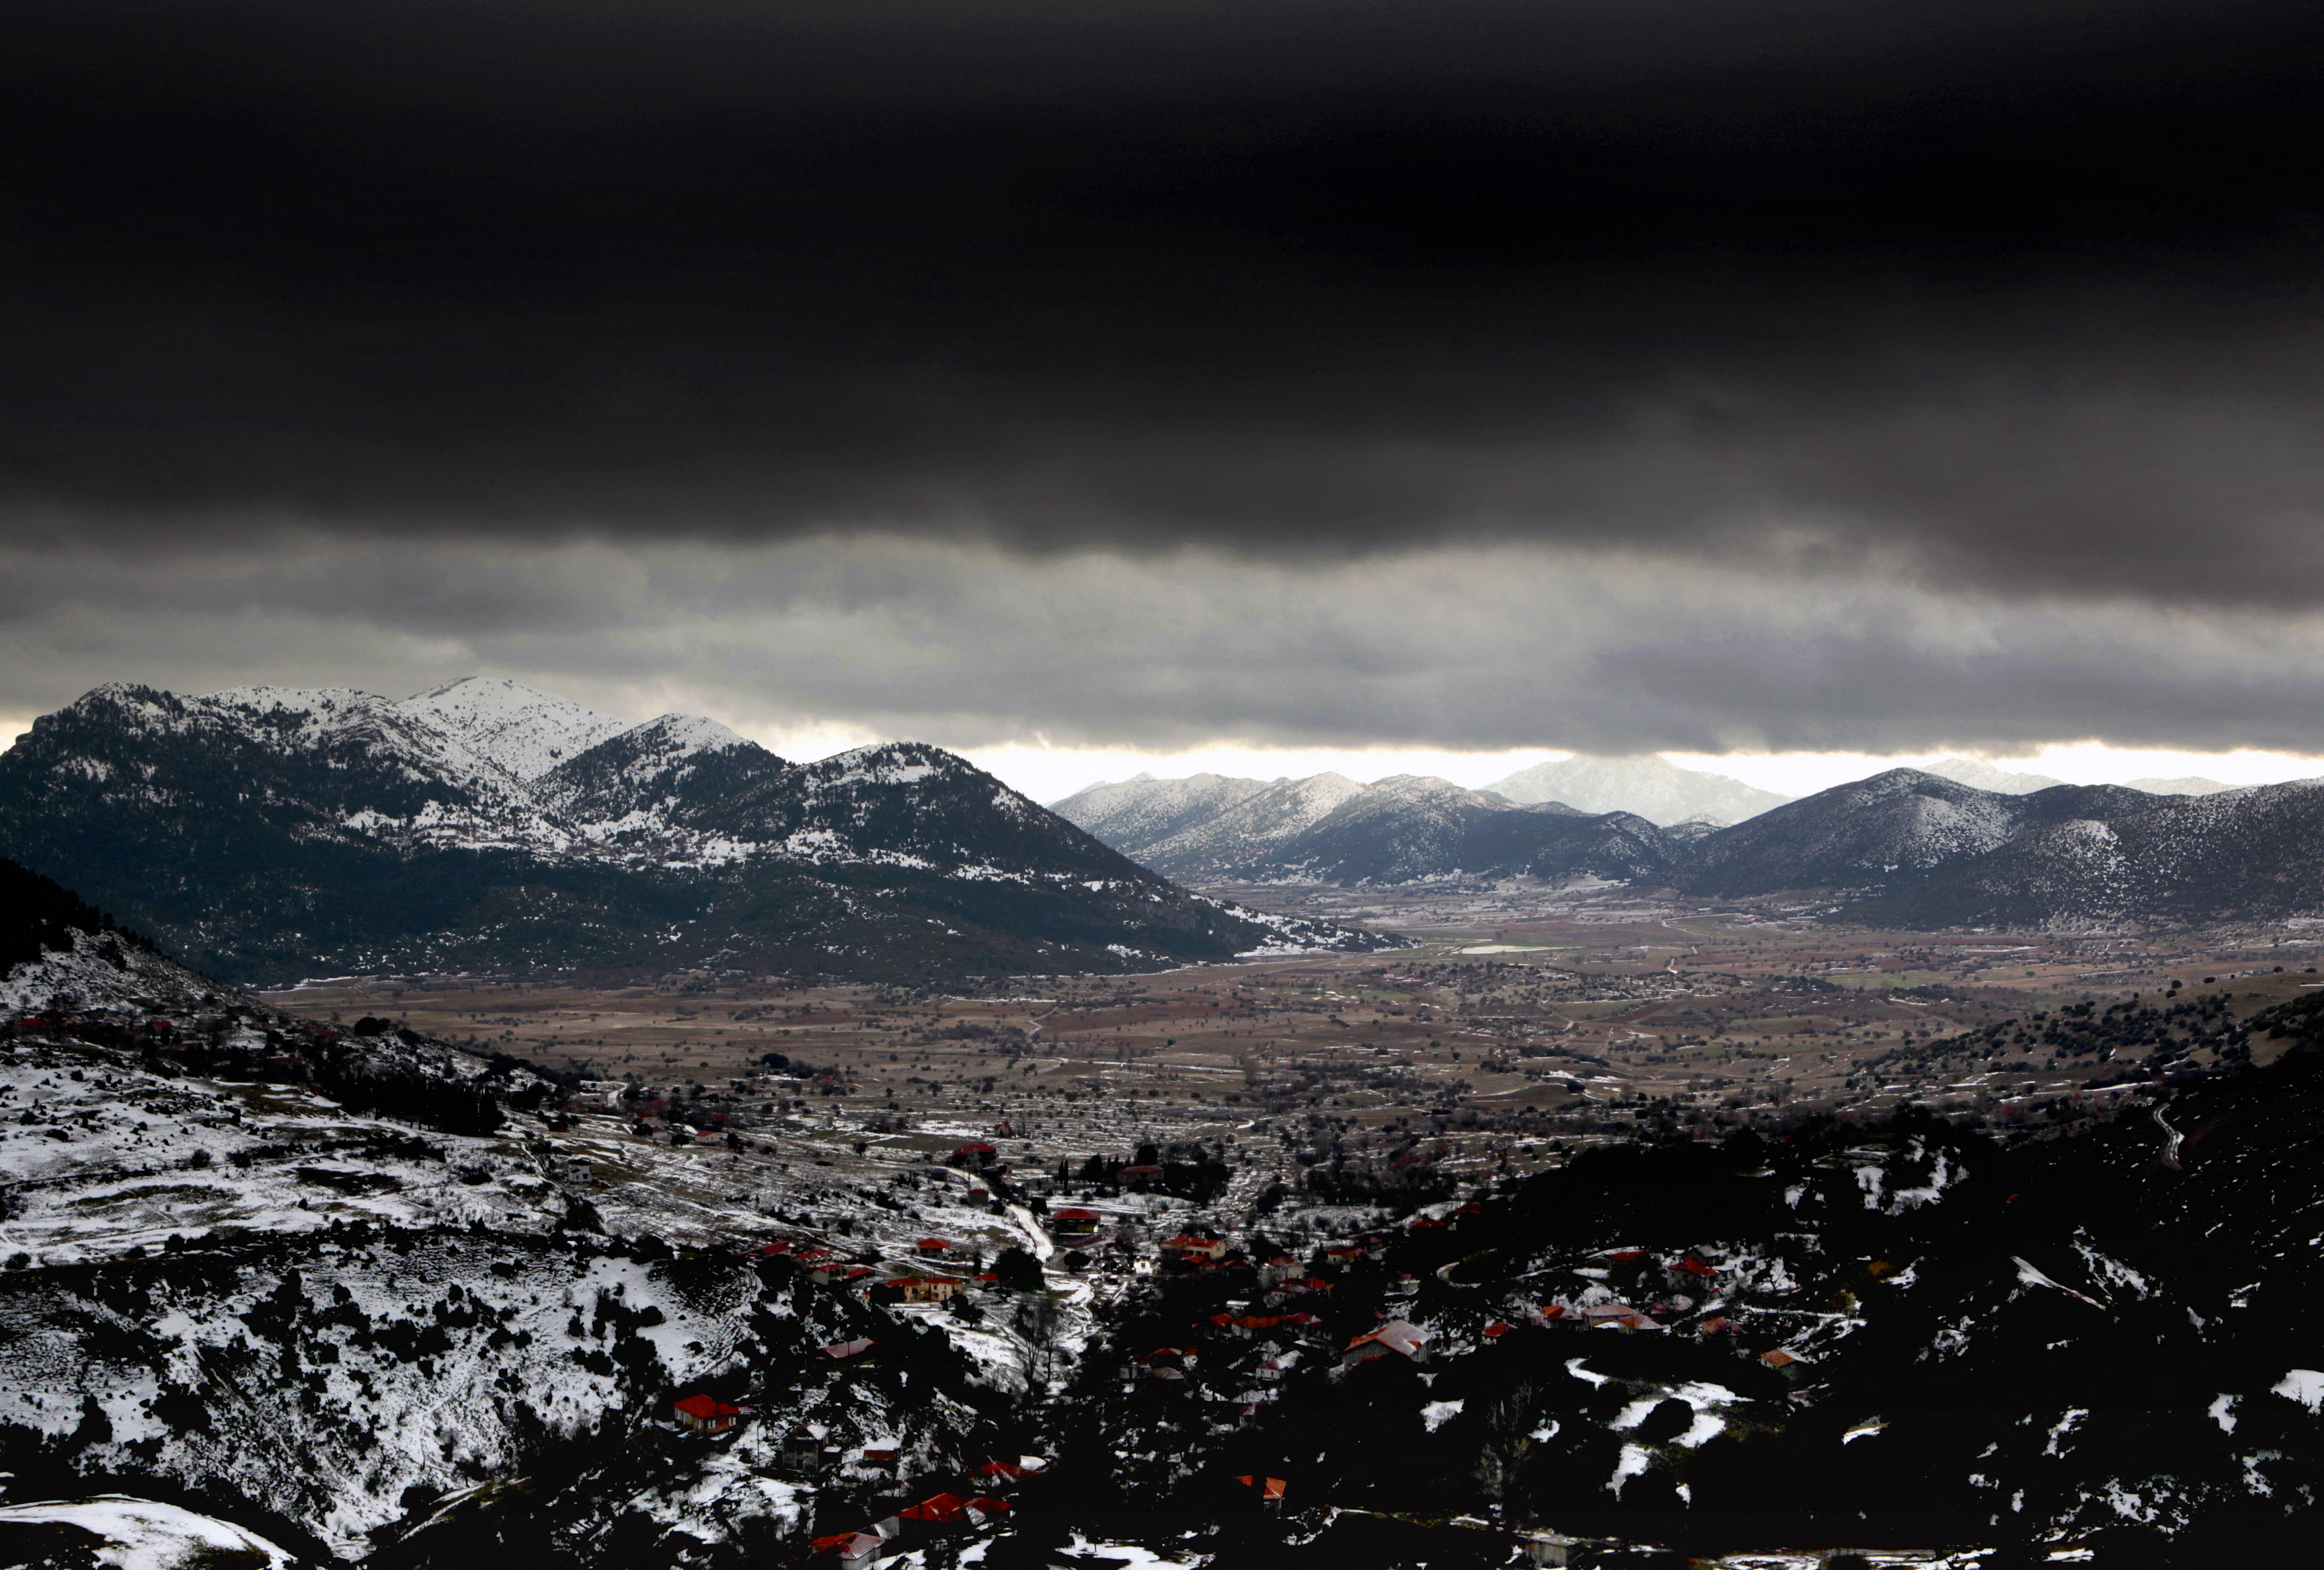 A storm approaches the snow covered mountain range of Panachaiko